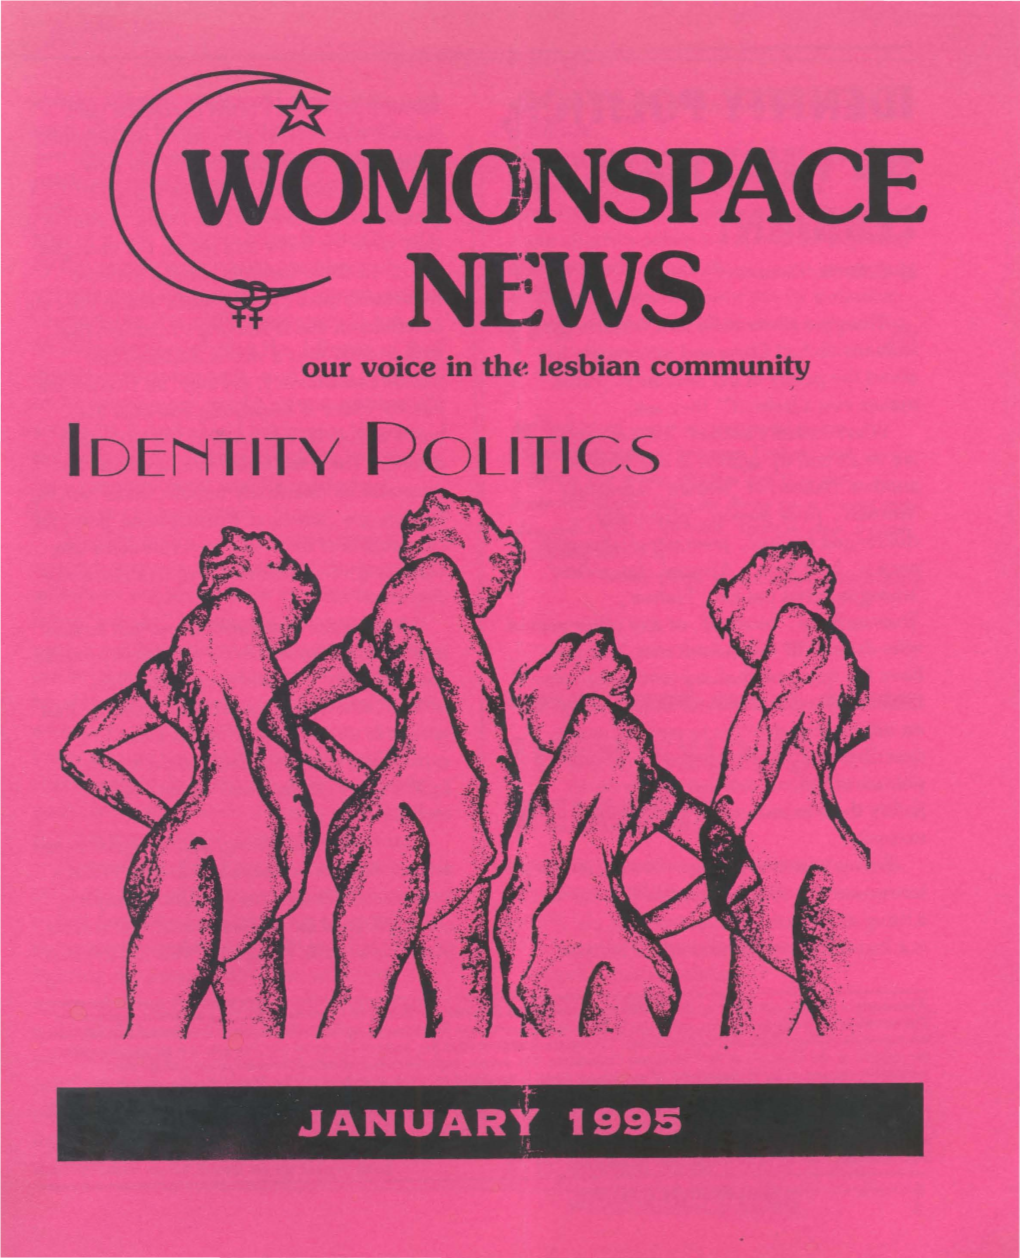 Ti. WOMONSPACE NEWS Our Voice in the Lesbian Community